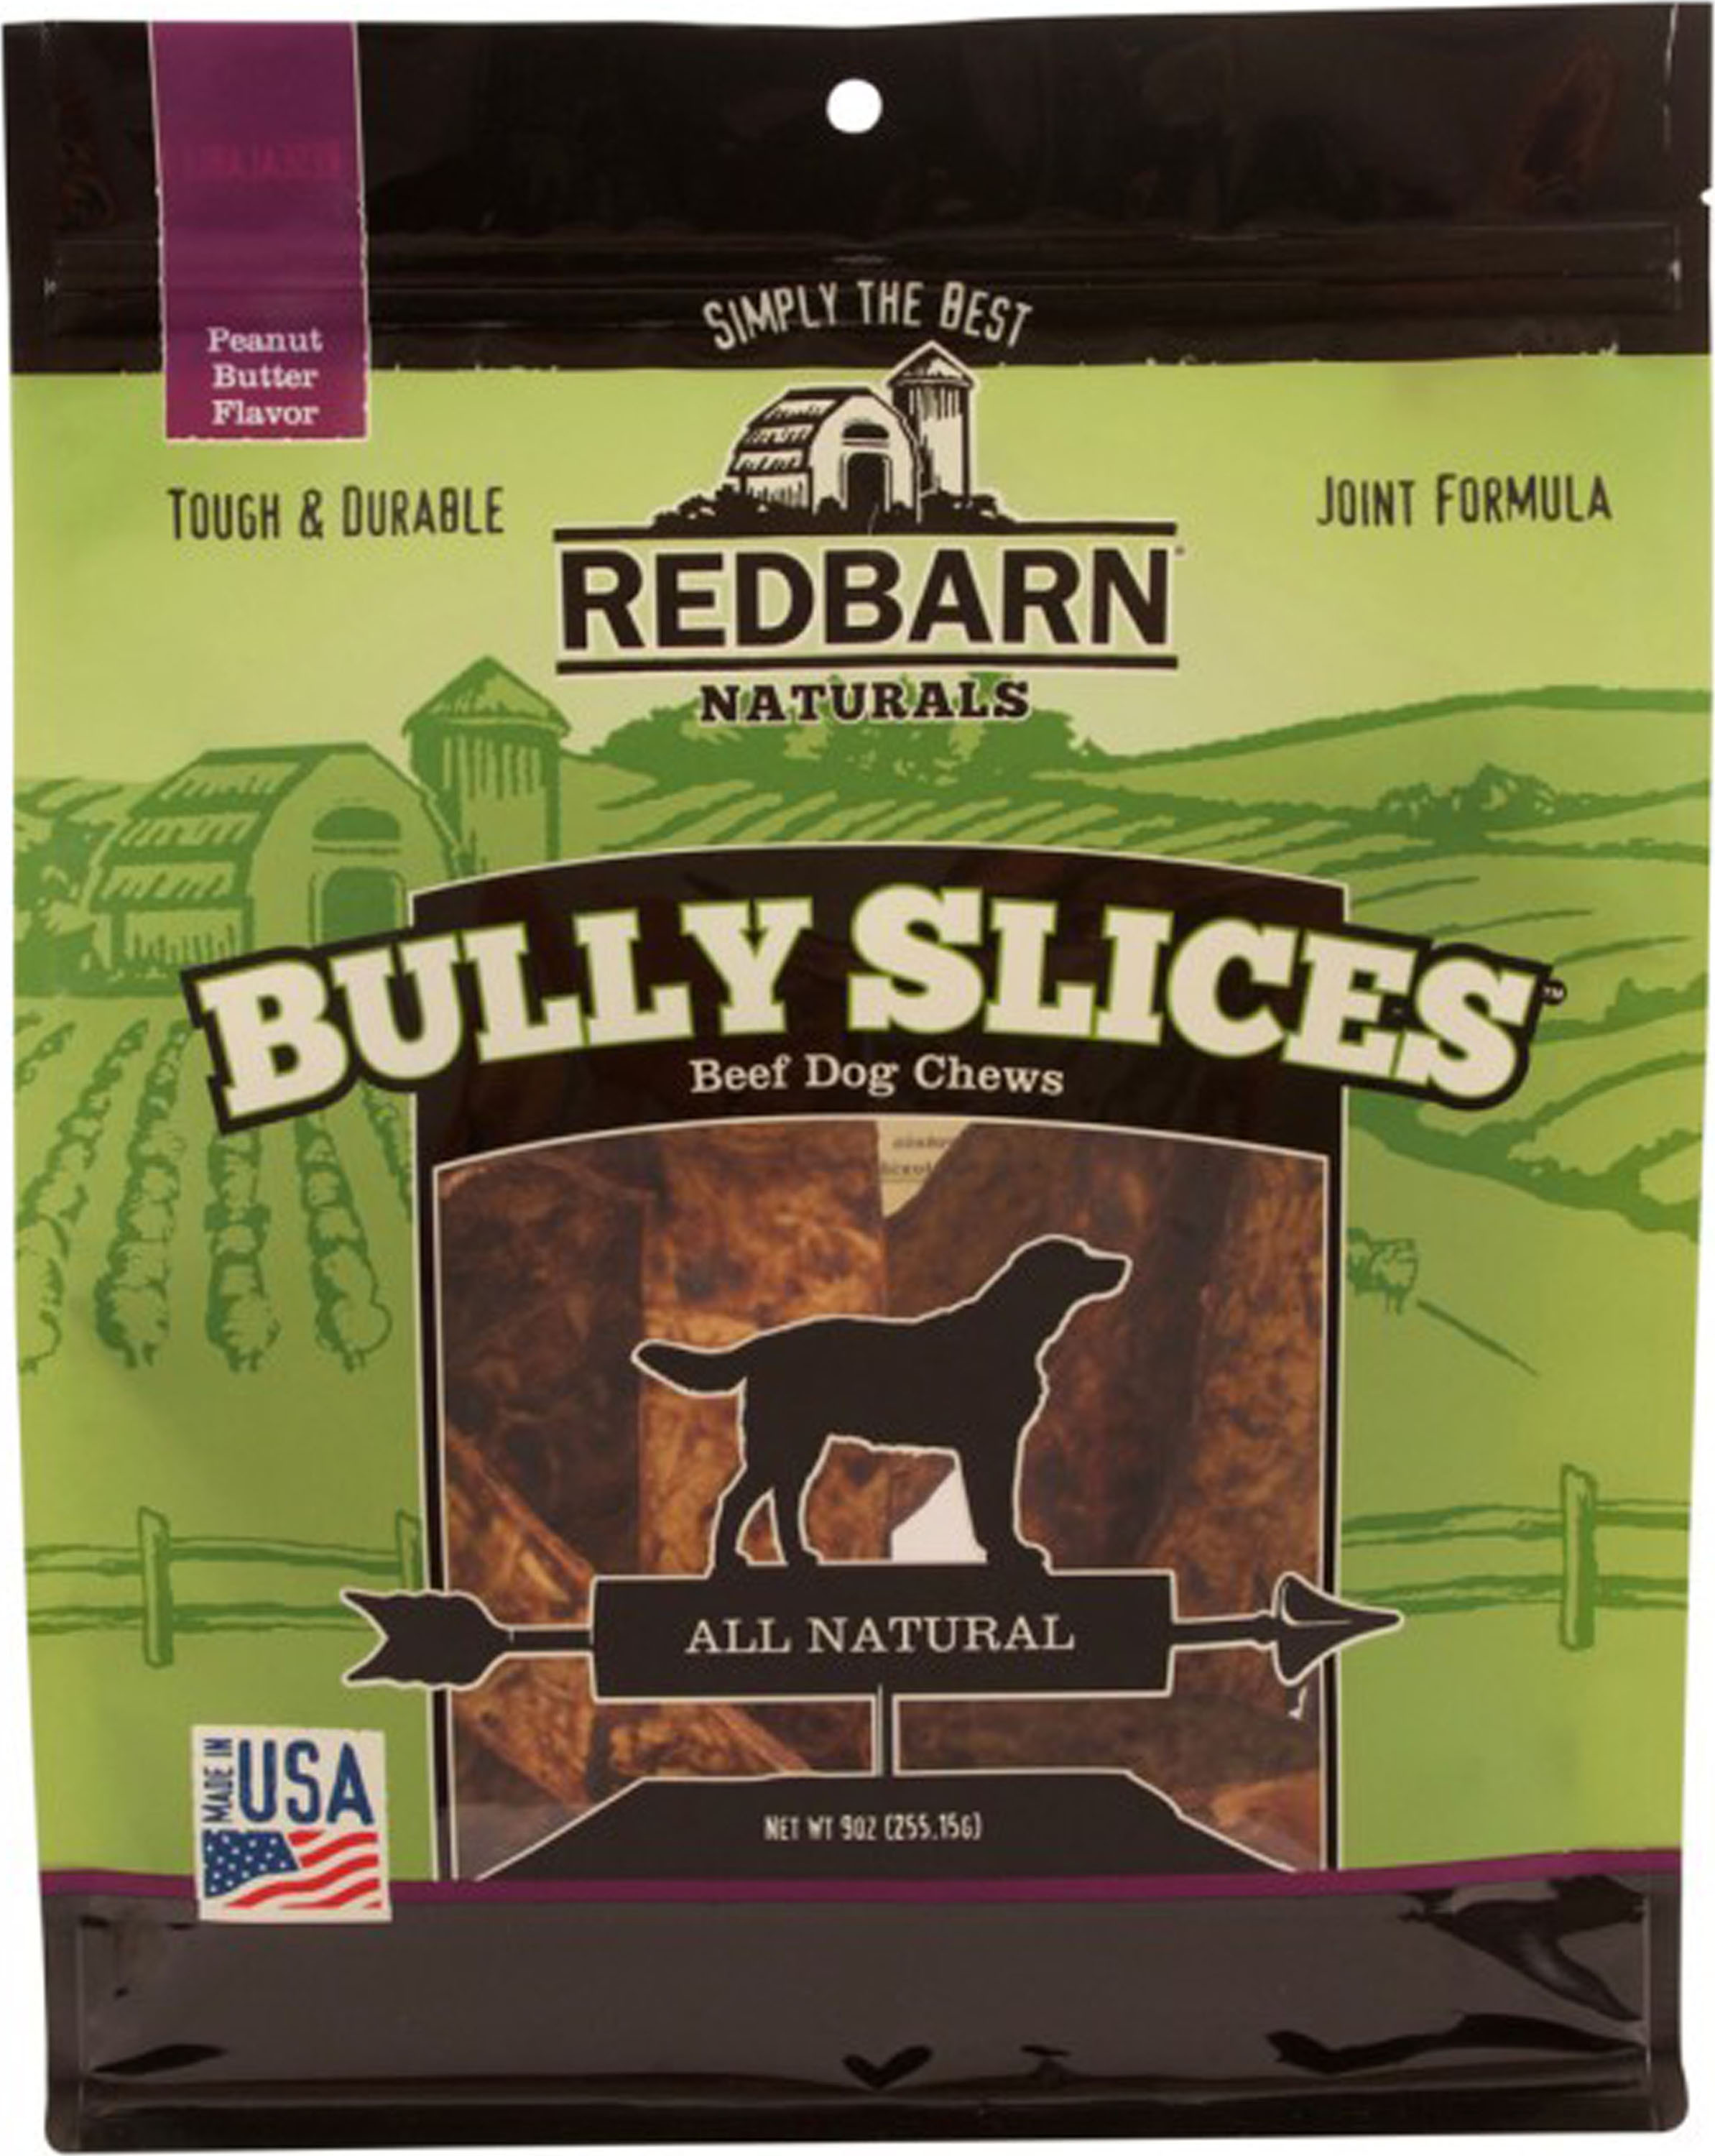 Bully Slices Beef Dog Chews Joint Formula (Option 1: 9 Oz, Option 2: Peanut Butter)